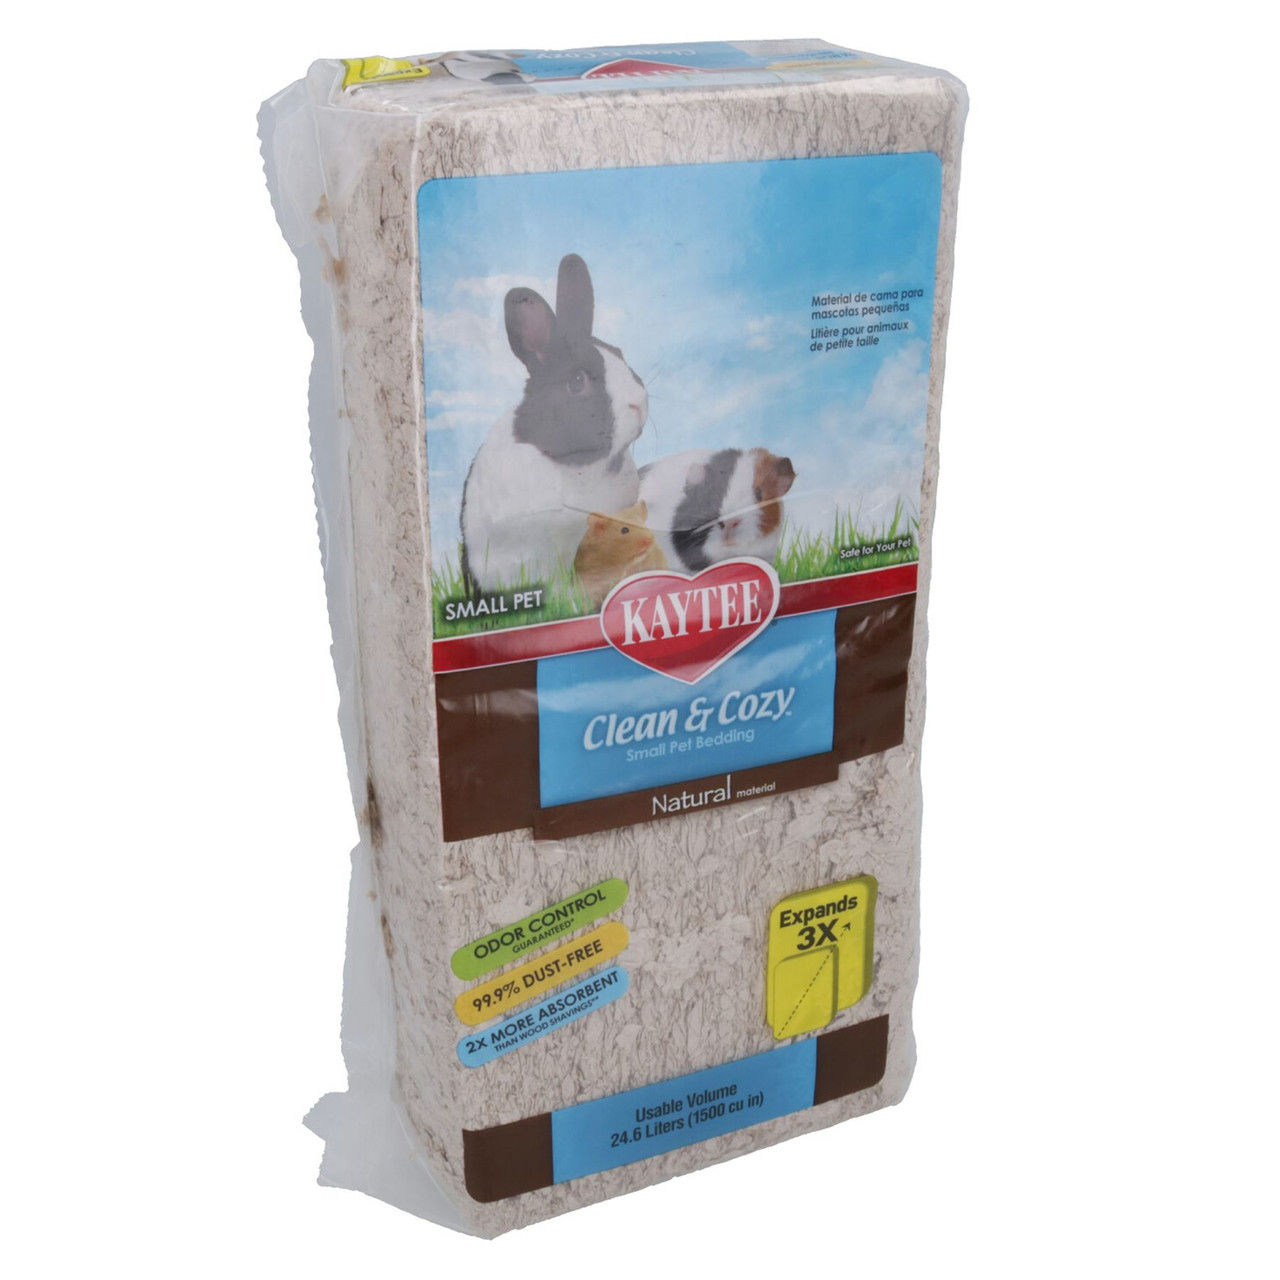 24.6 Liter Kaytee Clean and Cozy with Confetti Paper Small Pet Bedding